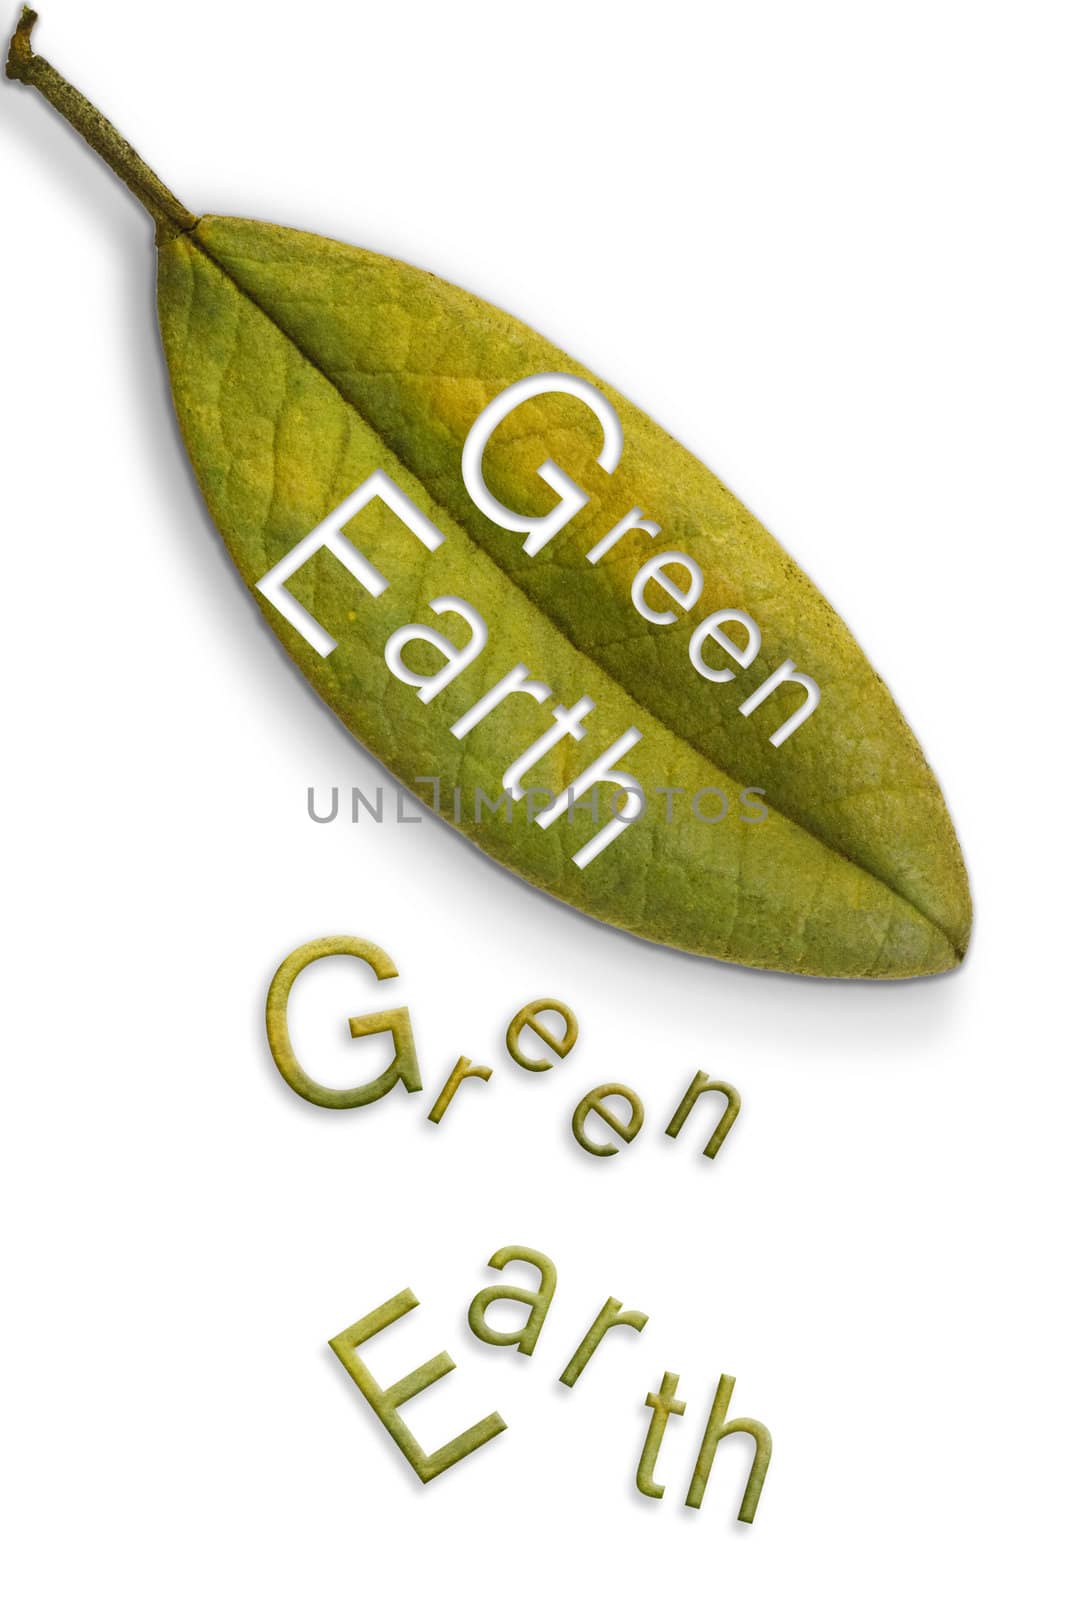 A leaf that has letters cut out of it that reads "green earth".  